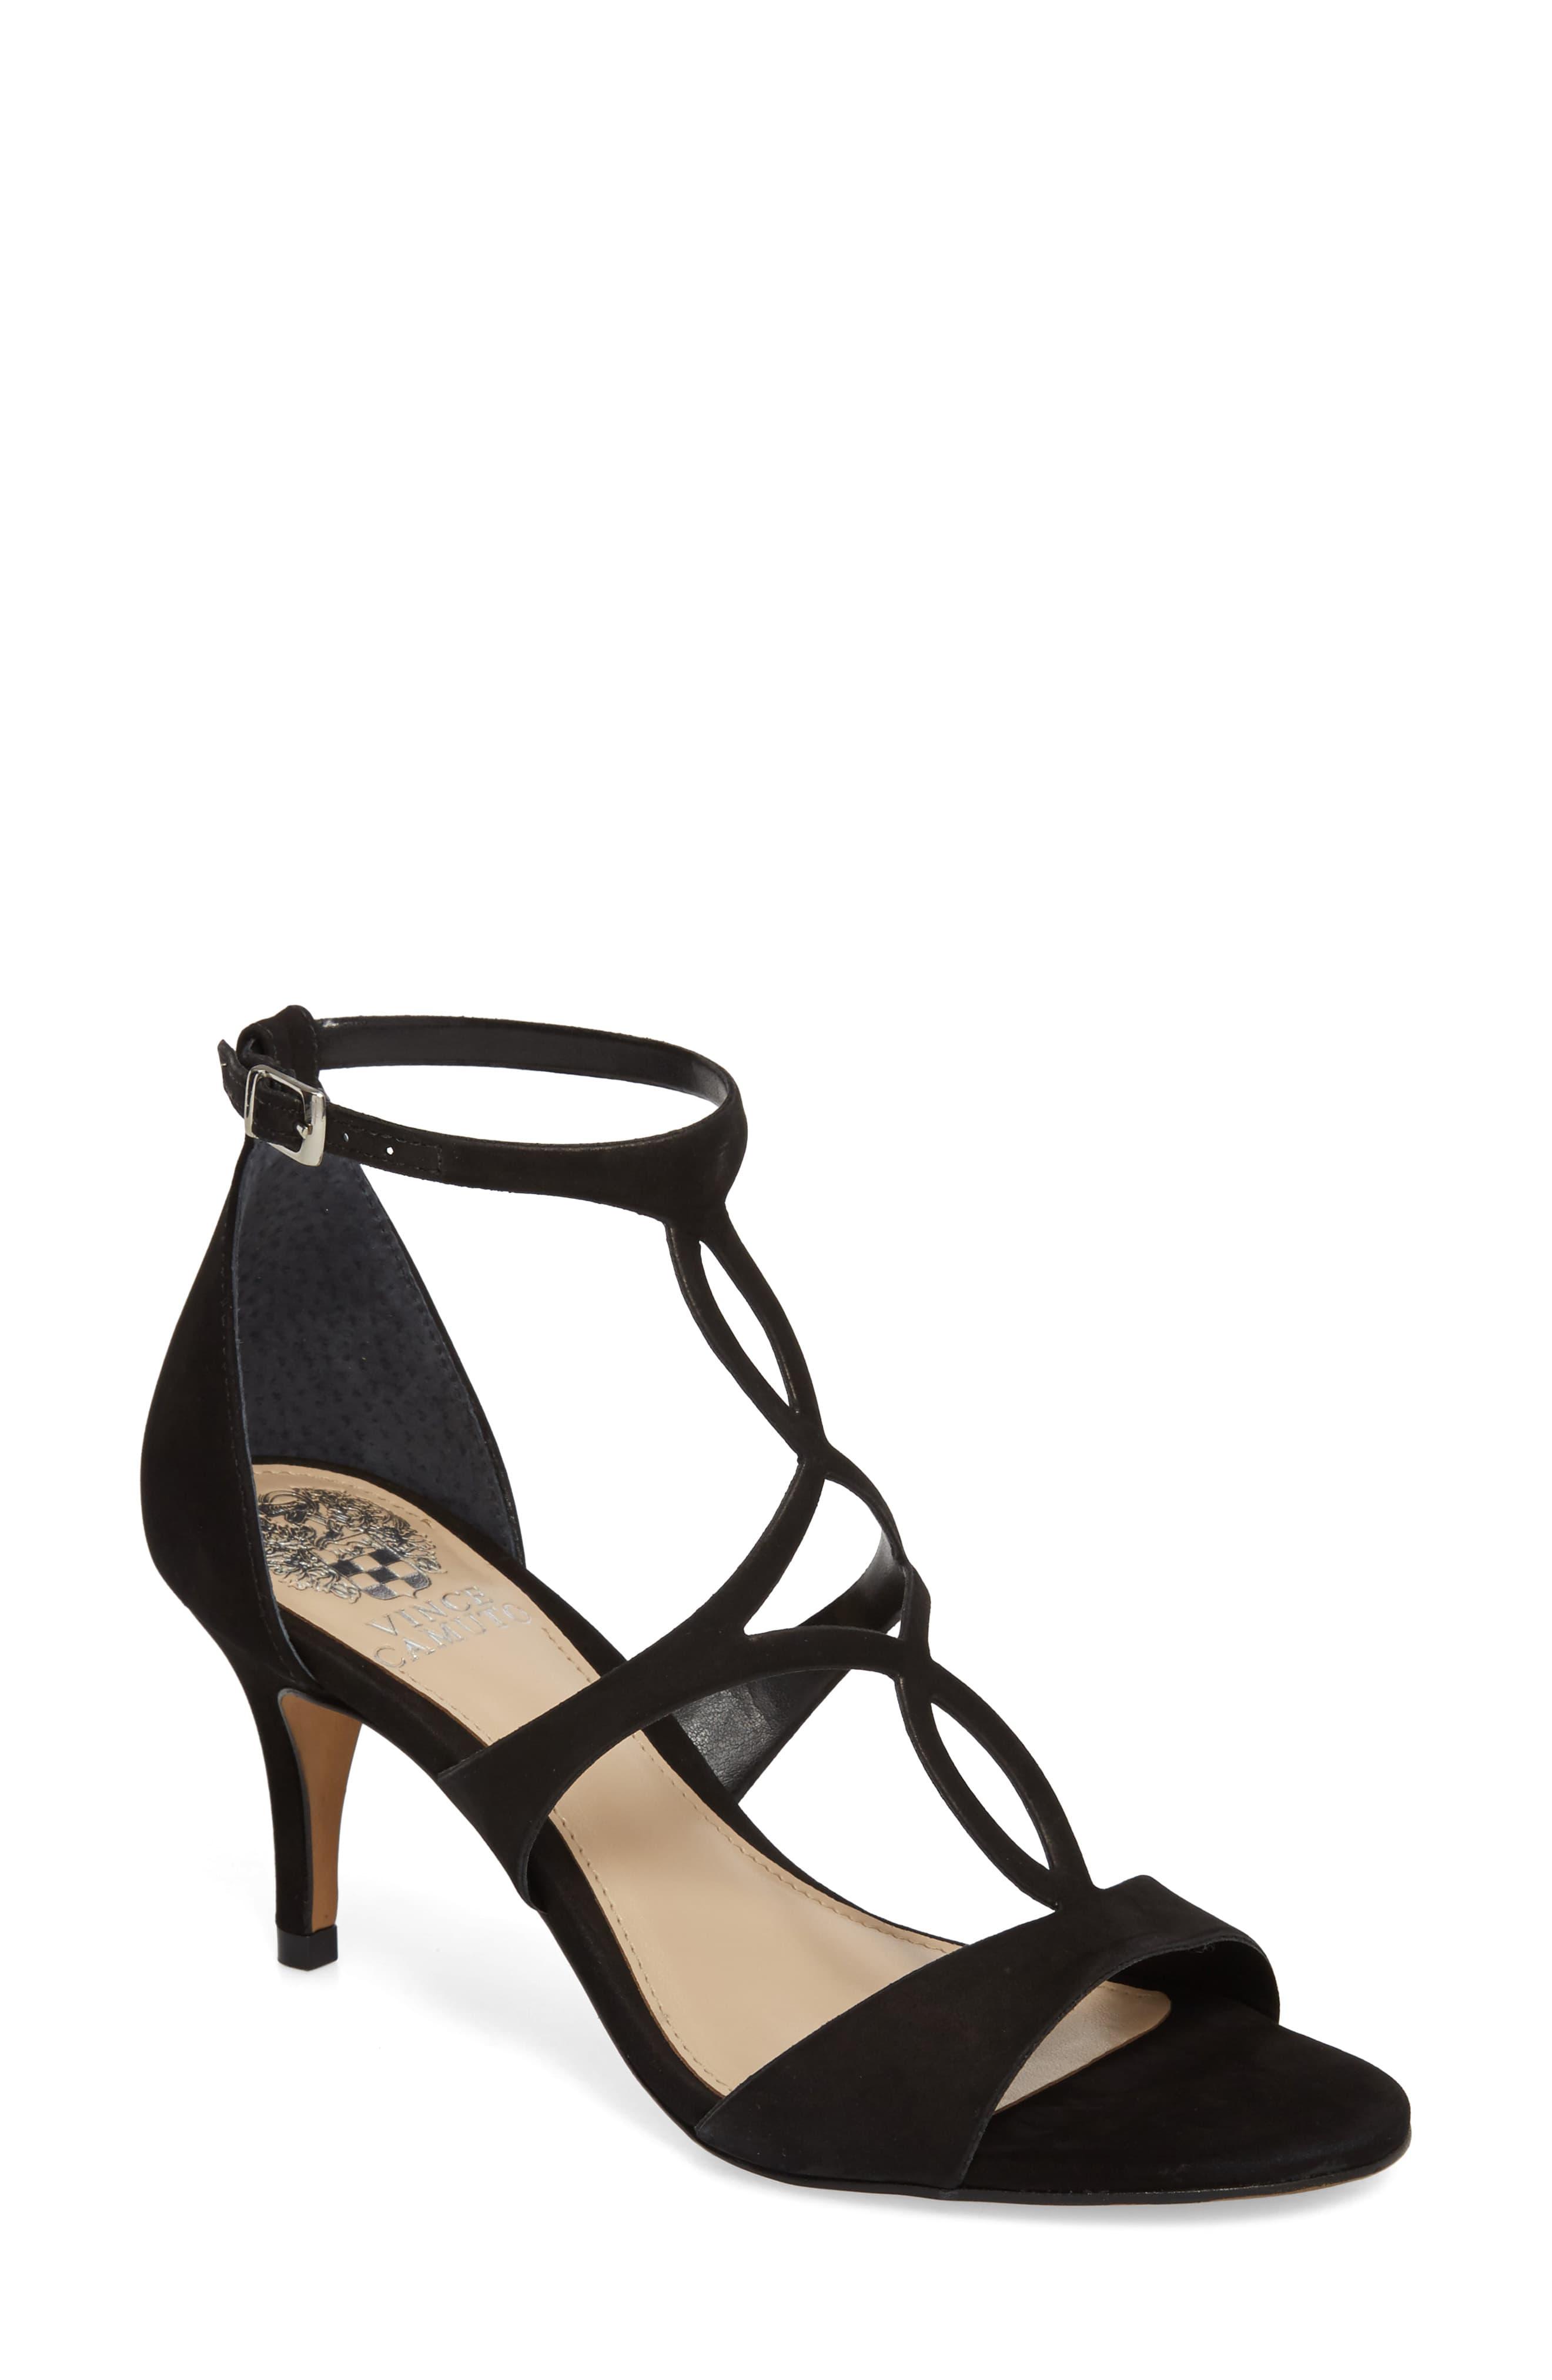 Vince Camuto Payto Sandal in Black Leather (Black) - Save 51% - Lyst